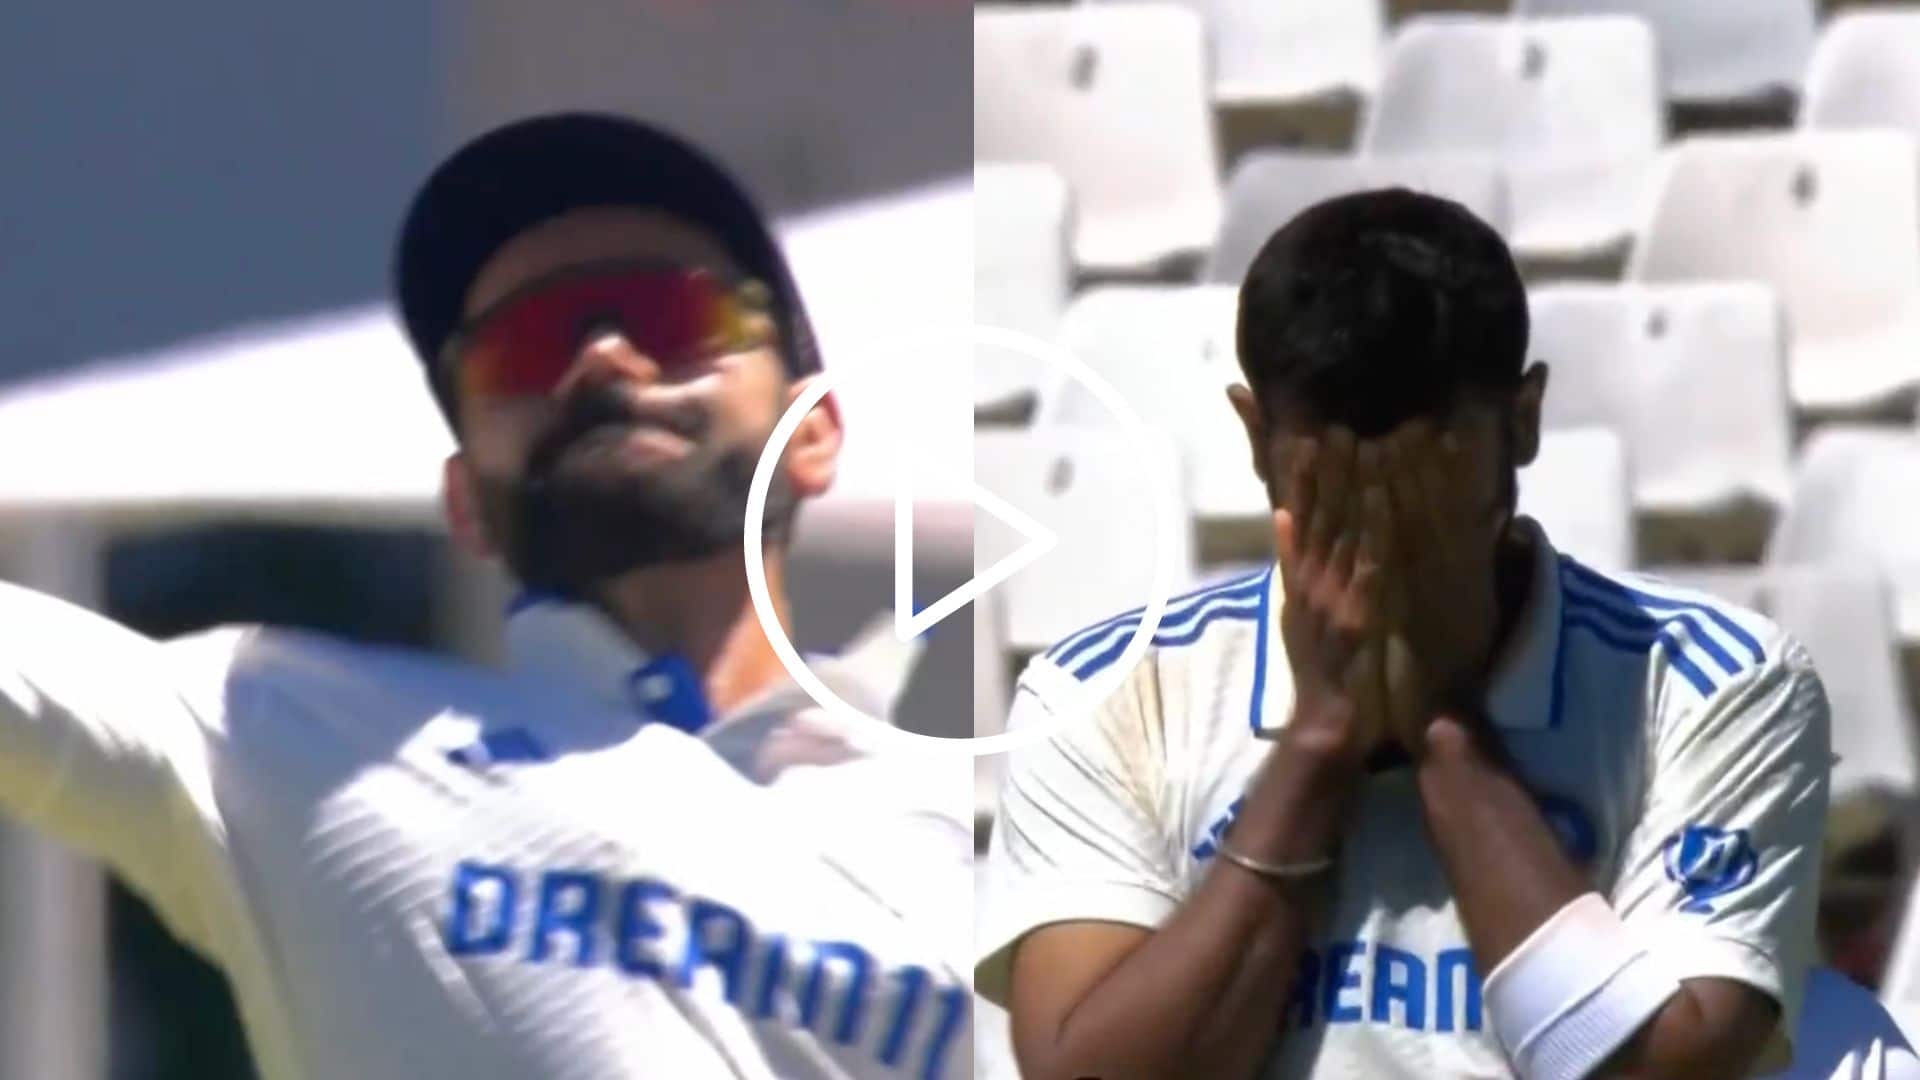 [Watch] Kohli Fumes In Anger, Bumrah Disappointed As Rahul Drops A Sitter To Give Markram A Lifeline